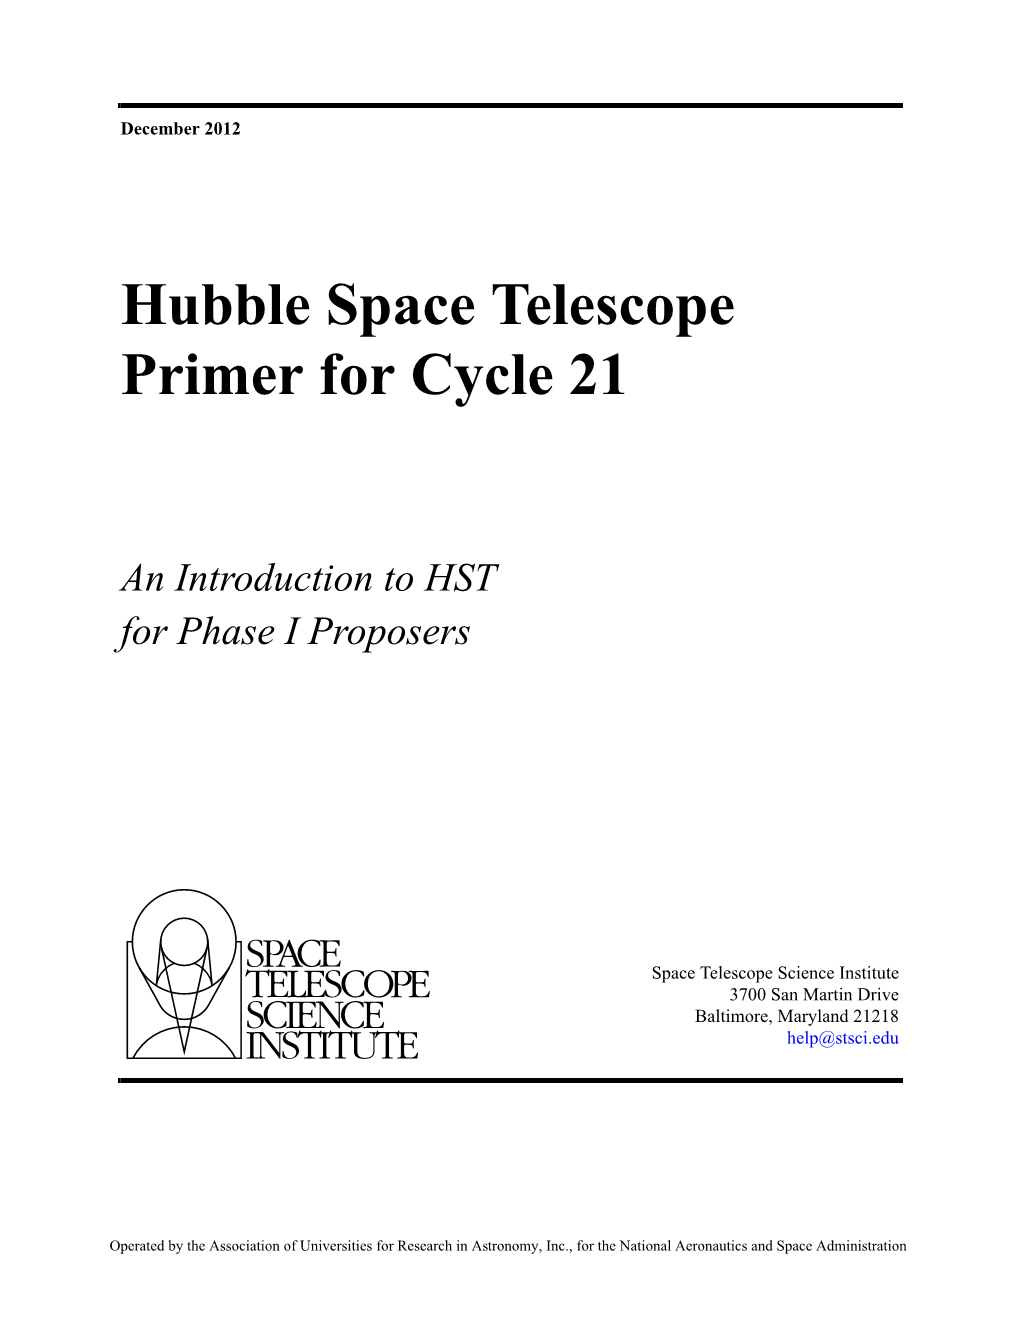 Hubble Space Telescope Primer for Cycle 21